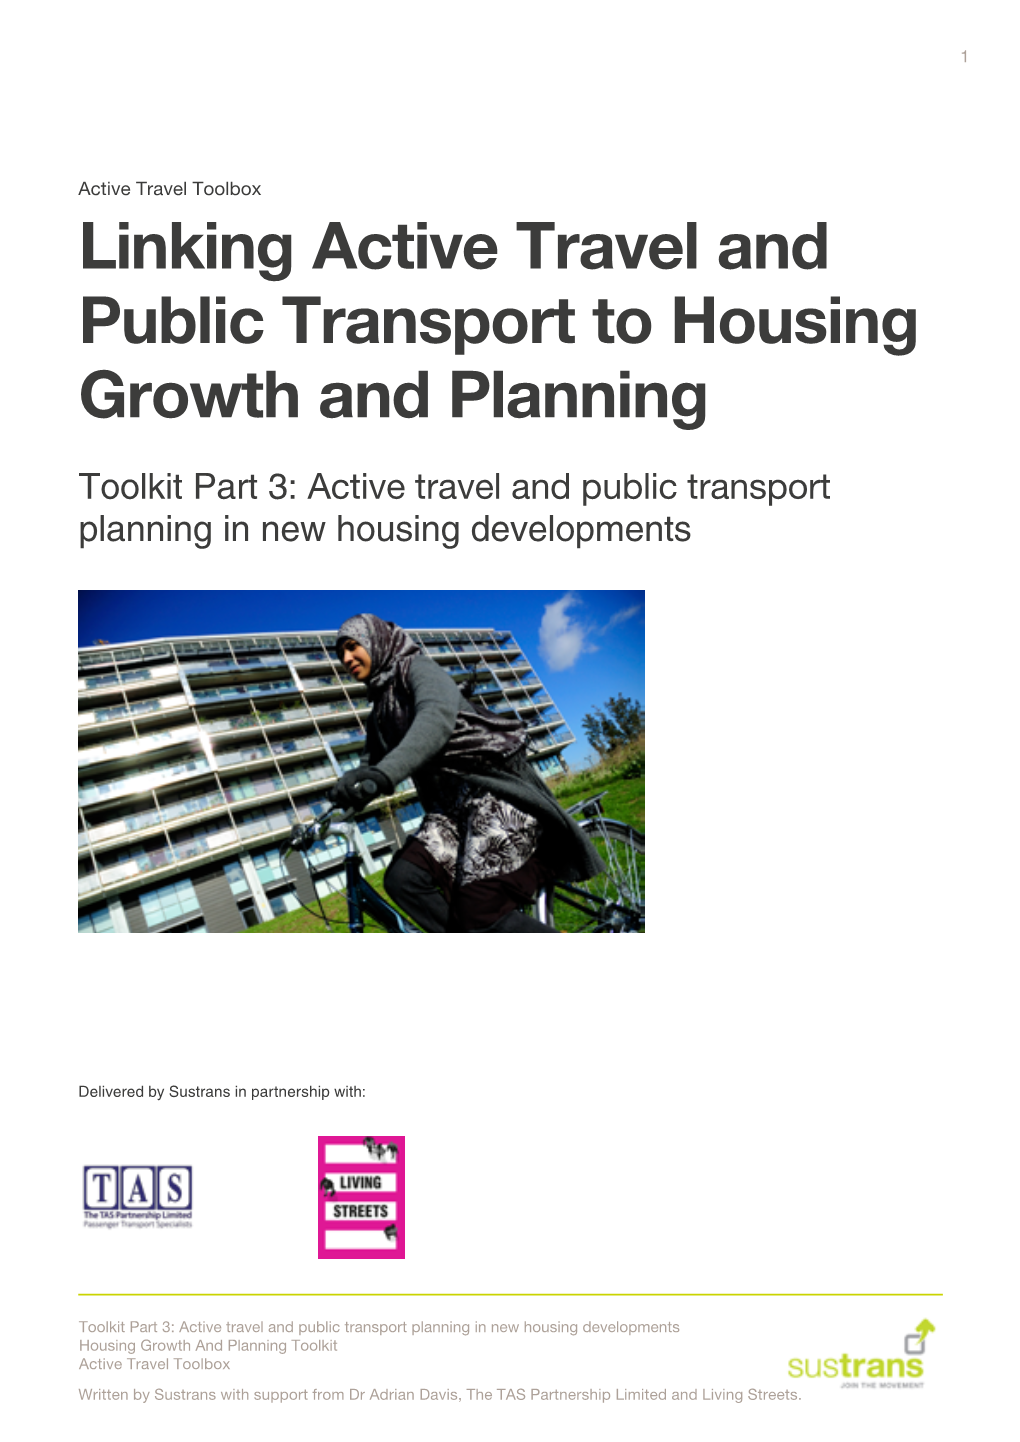 Active Travel and Public Transport Planning in New Housing Developments